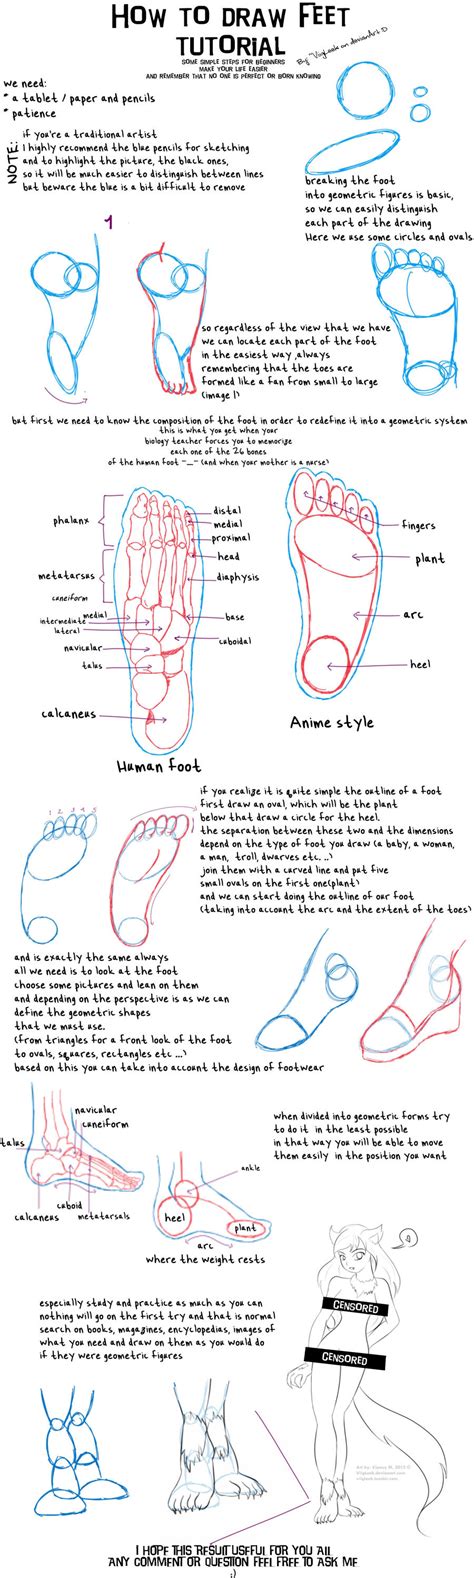 Tutorial How To Draw Feet By Toxicpinku On Deviantart